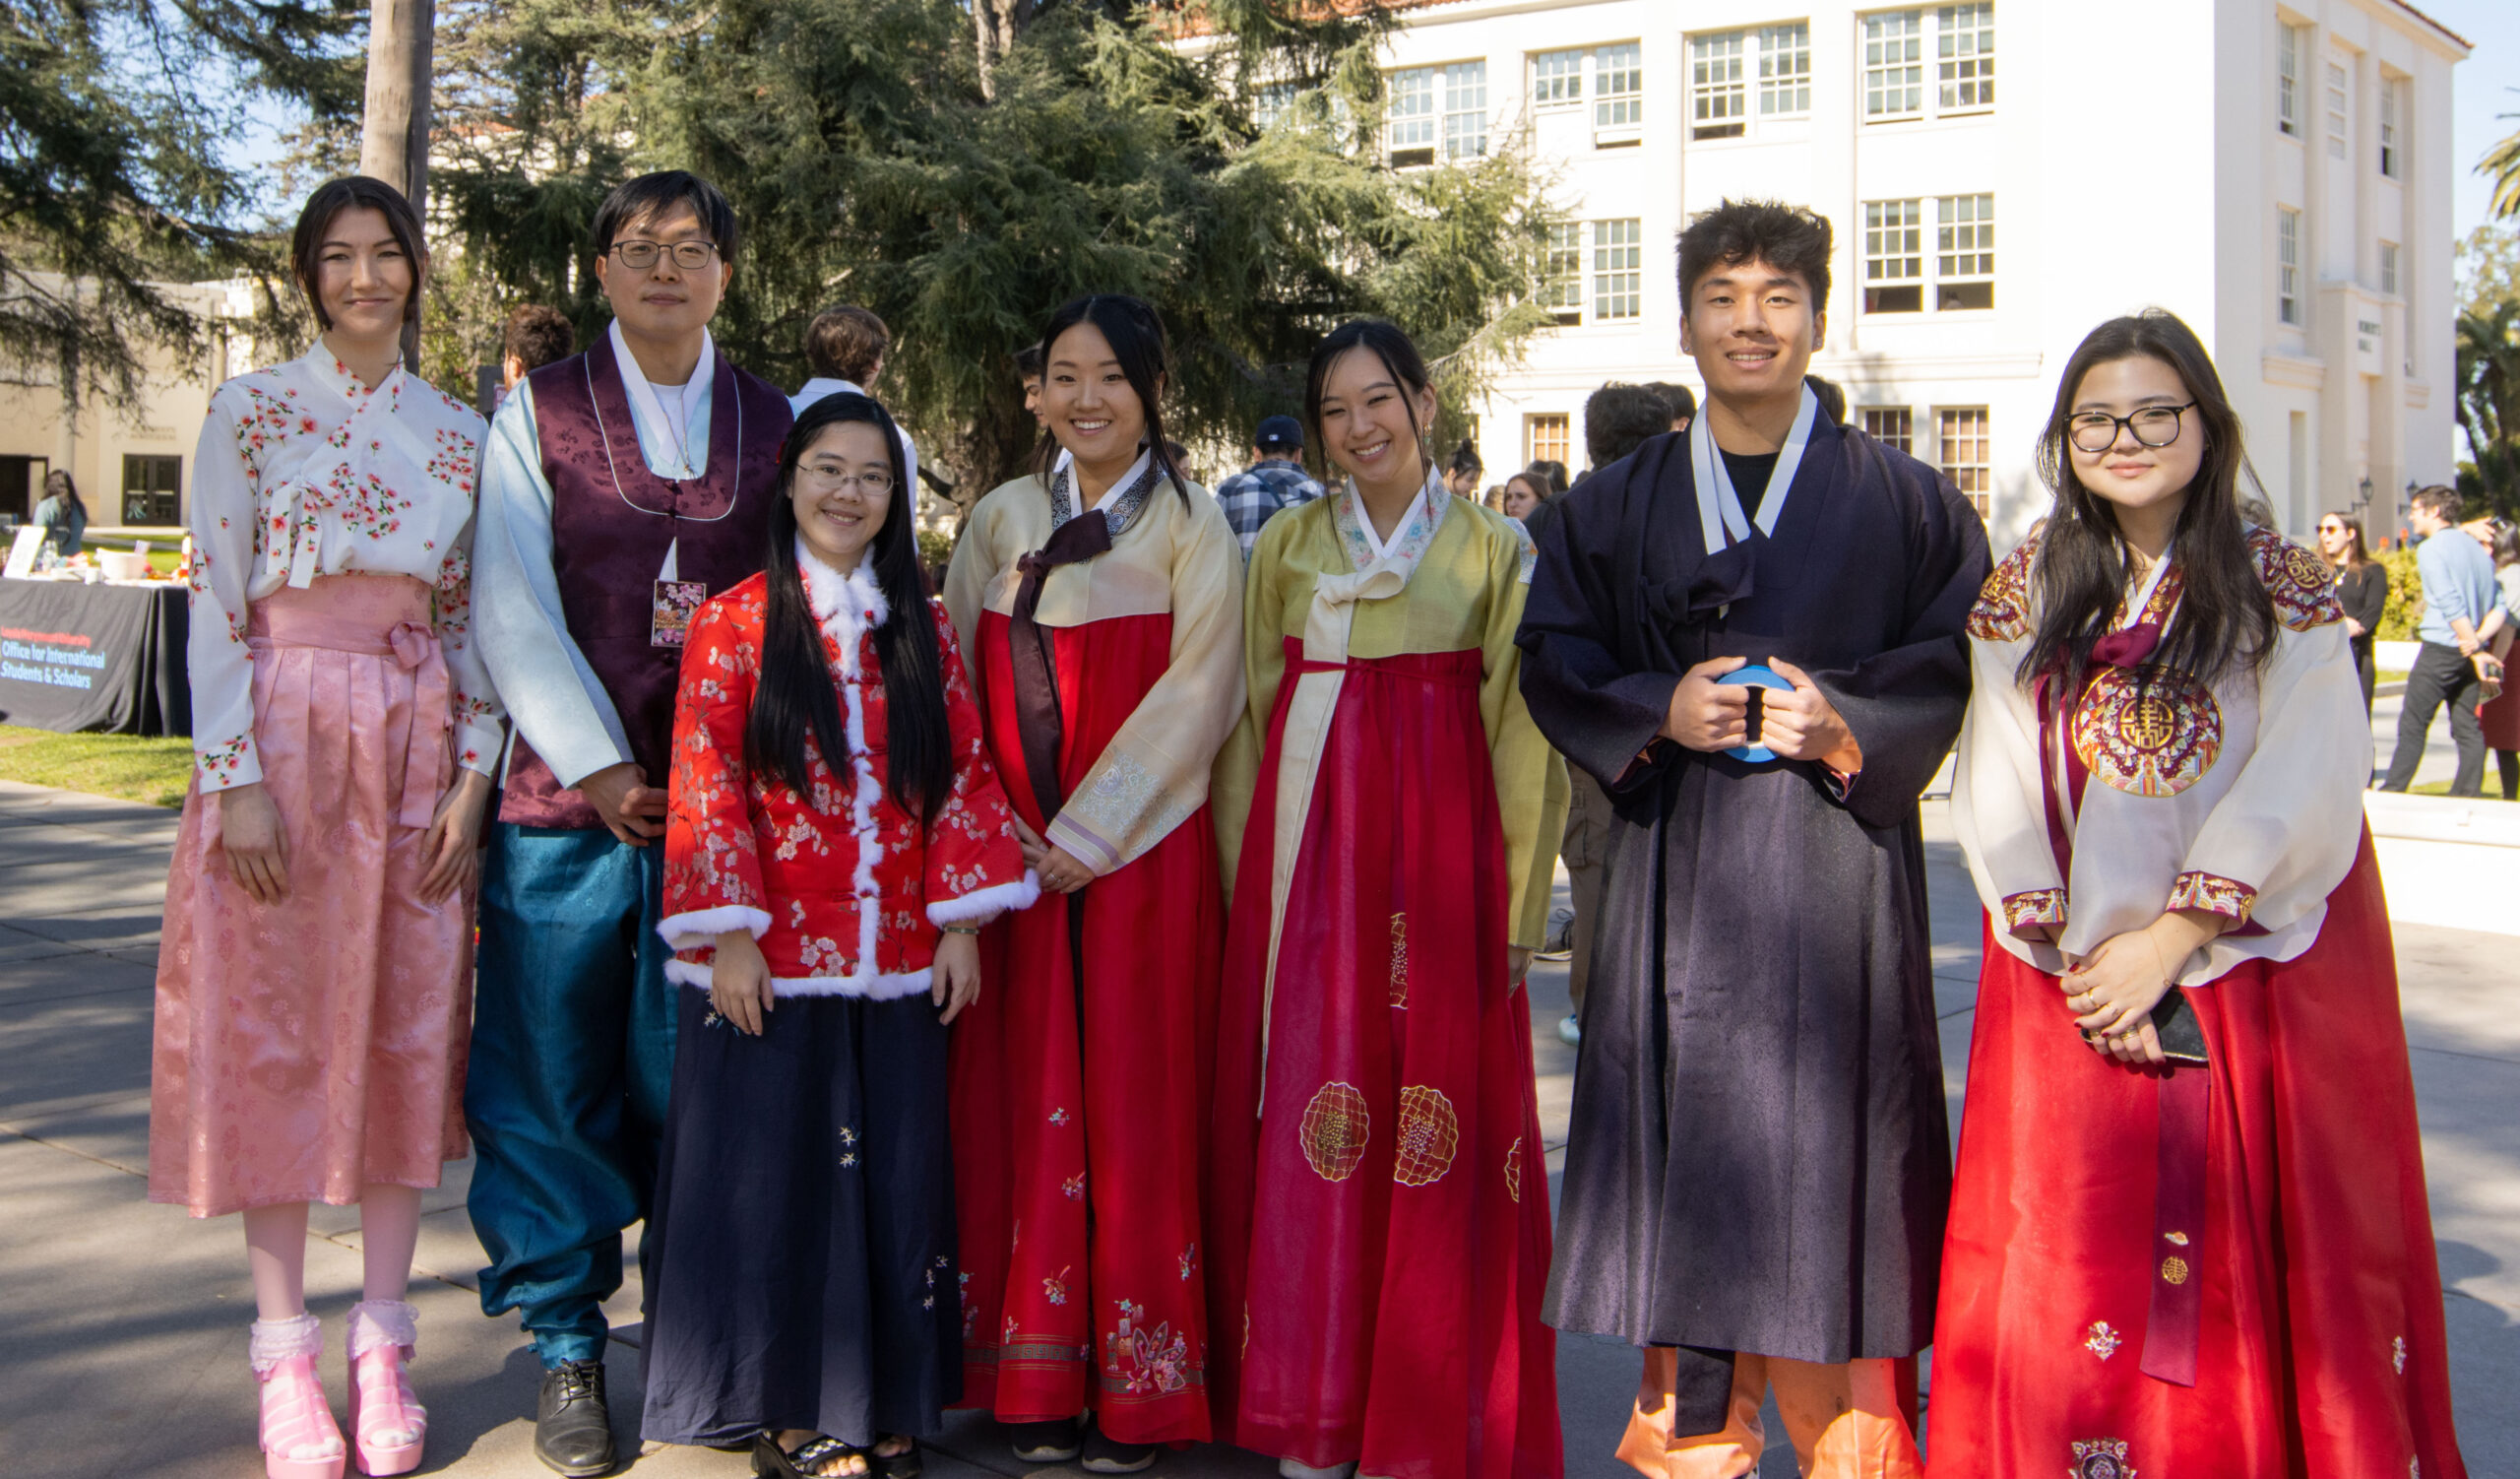 Students, staff, and faculty dress in traditional clothing to celebrate the Lunar New Year.